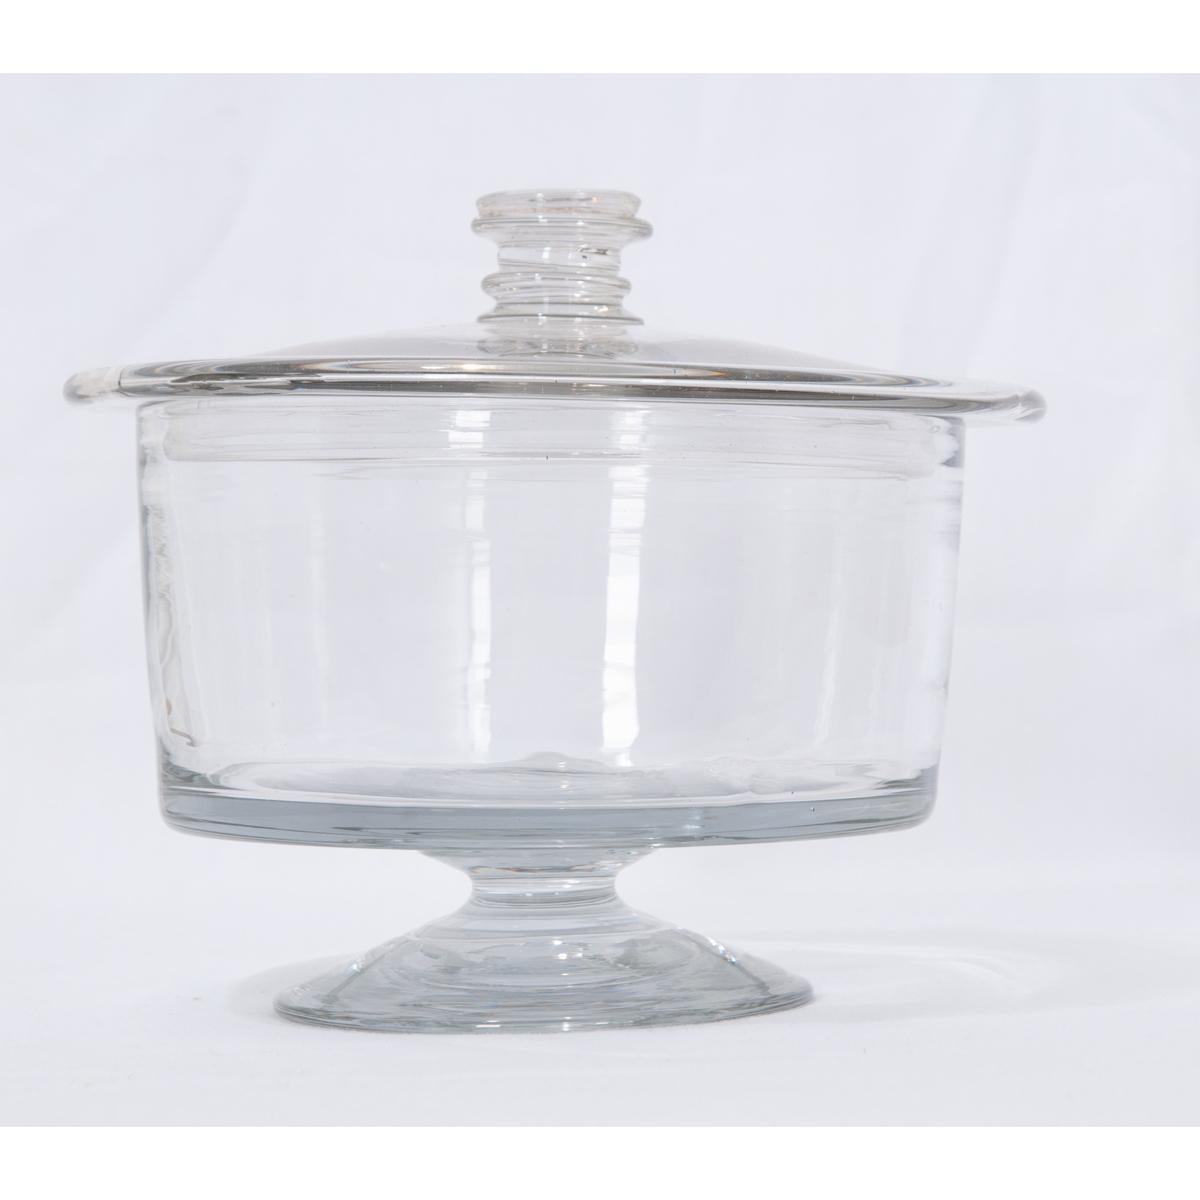 Petite, clear glass jar with lid. This sweet little jar is raised on a short pedestal and is crowned with a flat lid. The lid overhangs the jar and has a ‘turned liked’ handle topping it off.